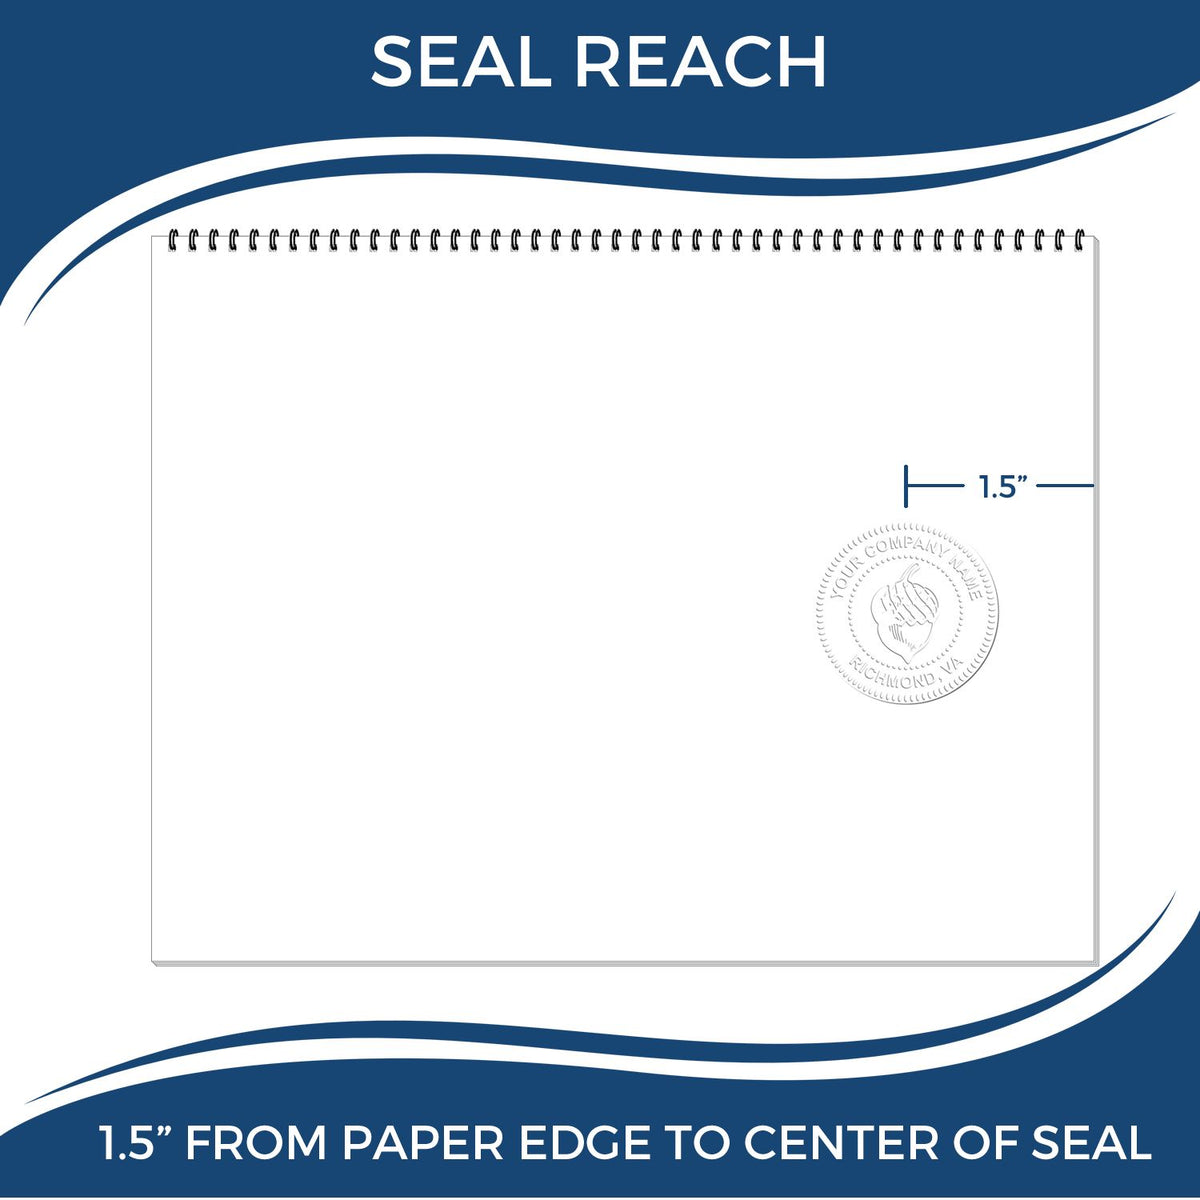 An infographic showing the seal reach which is represented by a ruler and a miniature seal image of the Hybrid Connecticut Engineer Seal